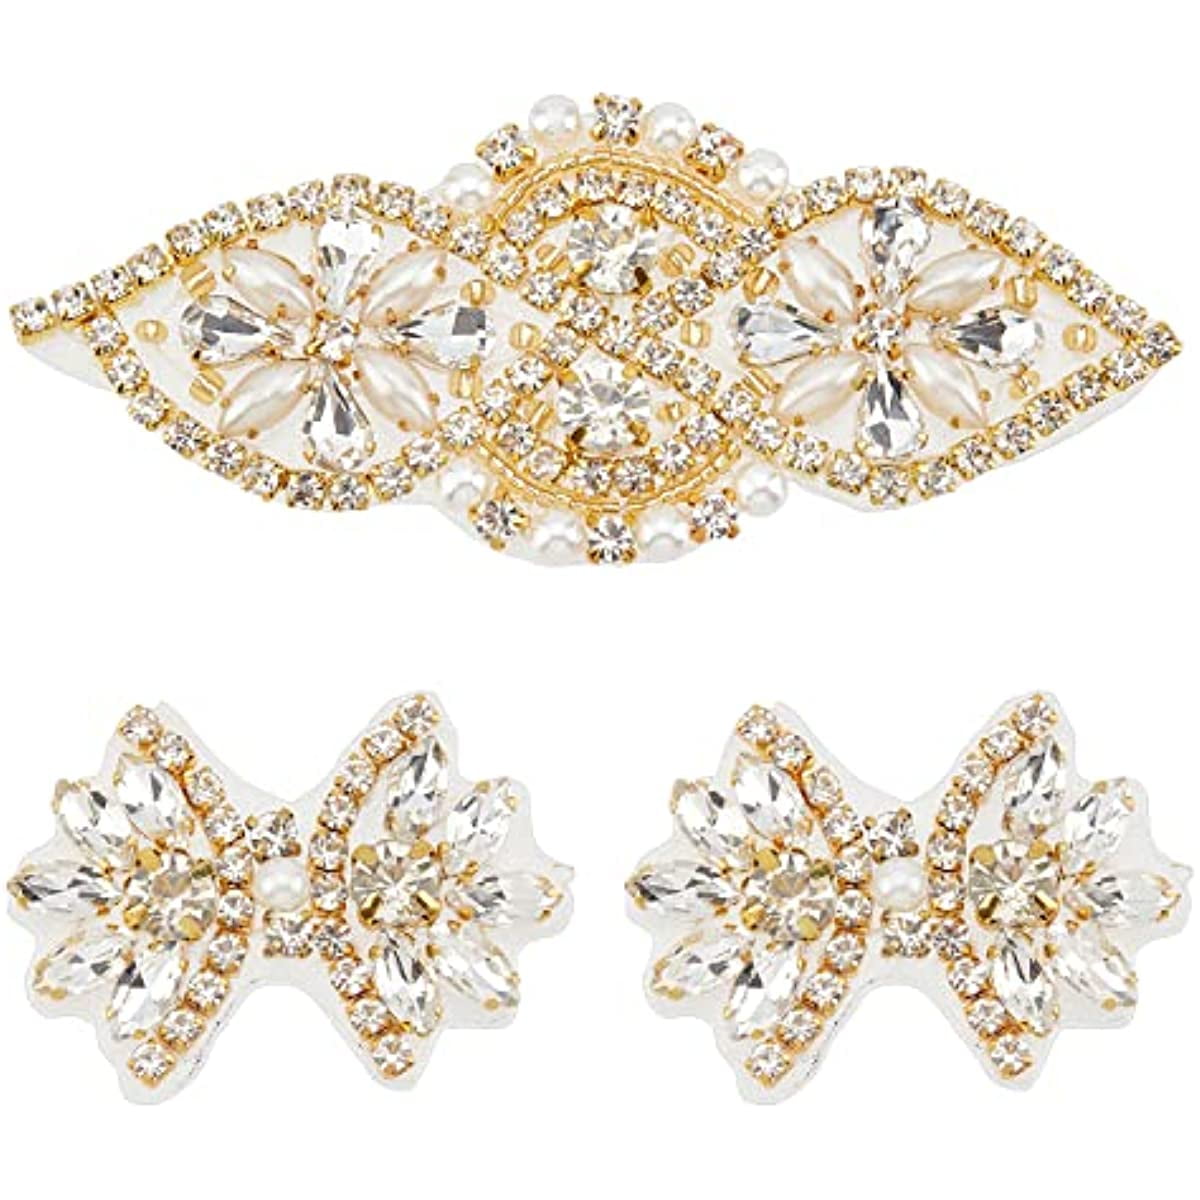 3Pcs 2 Style Rhinestone Applique with Beads for Wedding Dress Gold Iron  on/Sew Rhinestone Patch Rhinestone Sewing Flower Shape Hotfix Applique for  Dress Headpiece Belt Shoes or Bags 